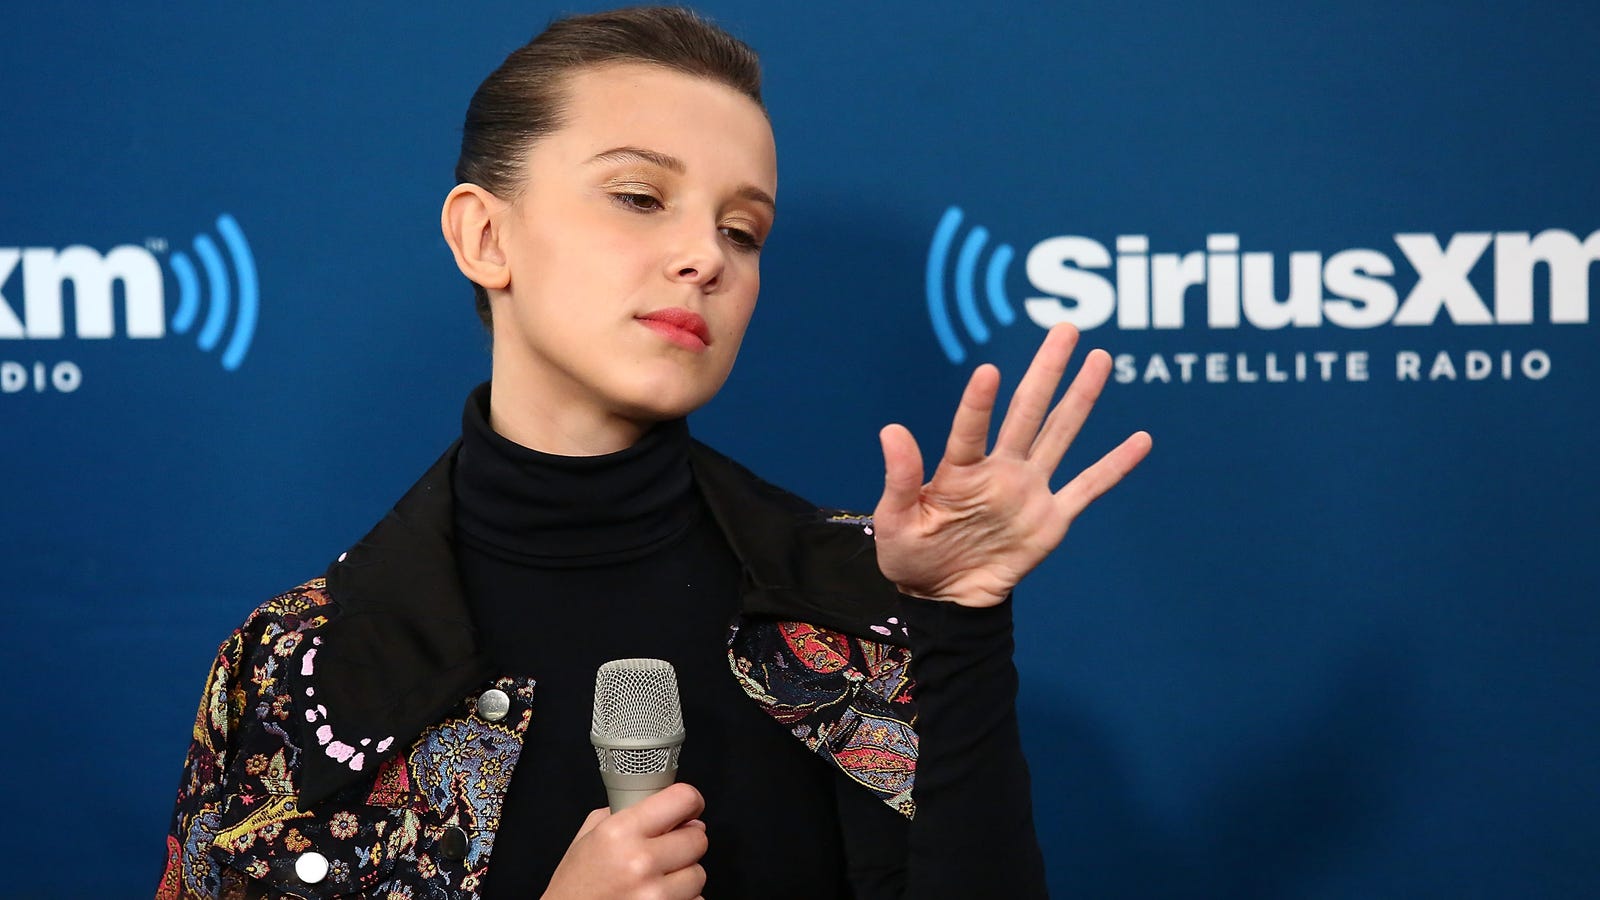 millie bobby brown flat earth